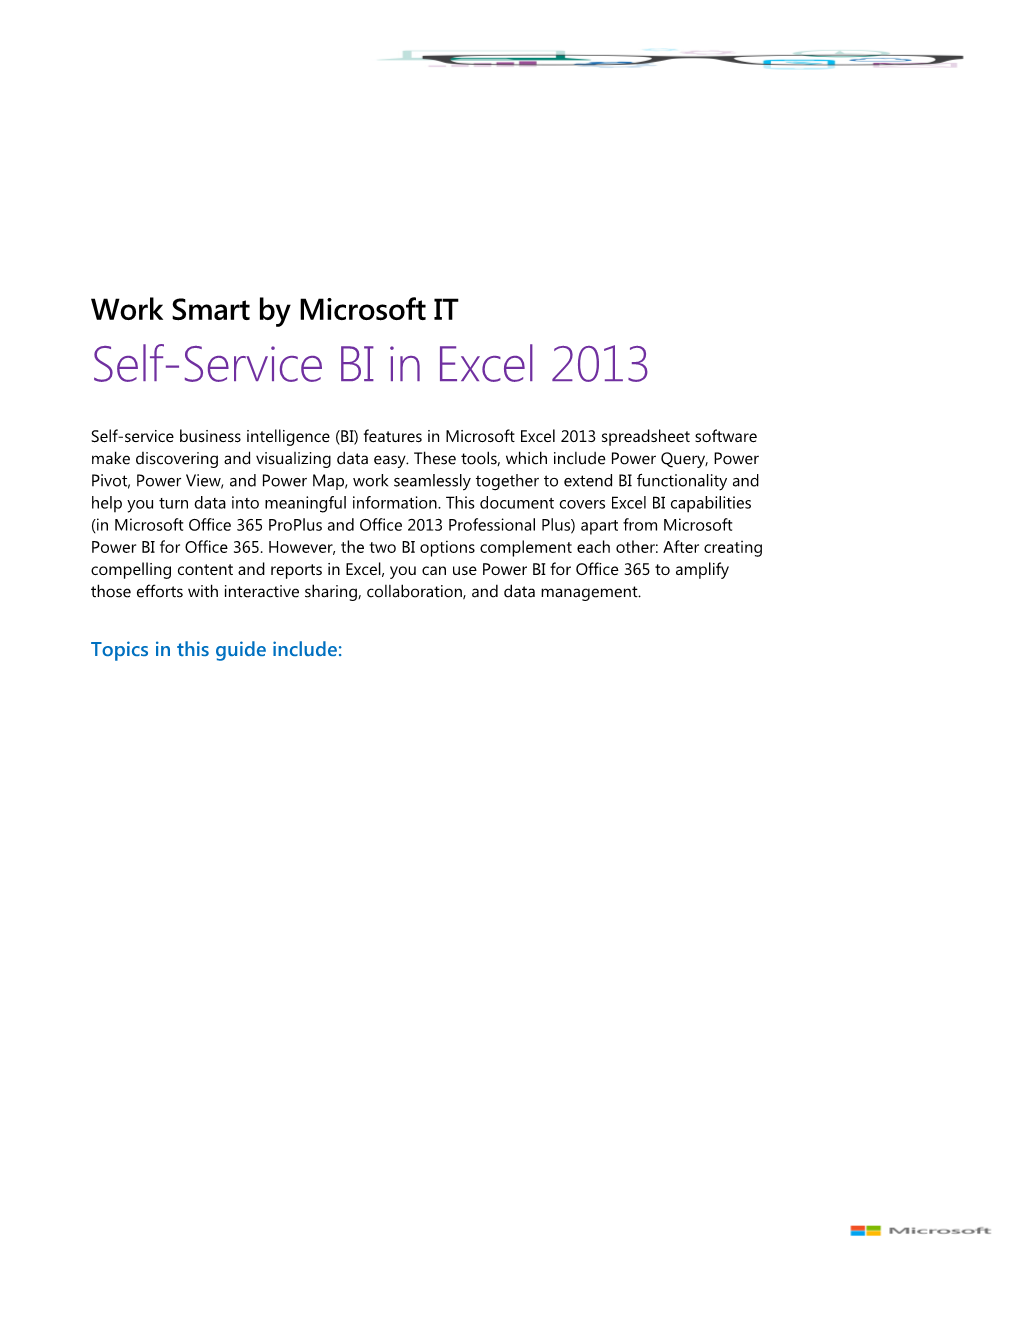 Work Smart: What S New in Excel 2013?